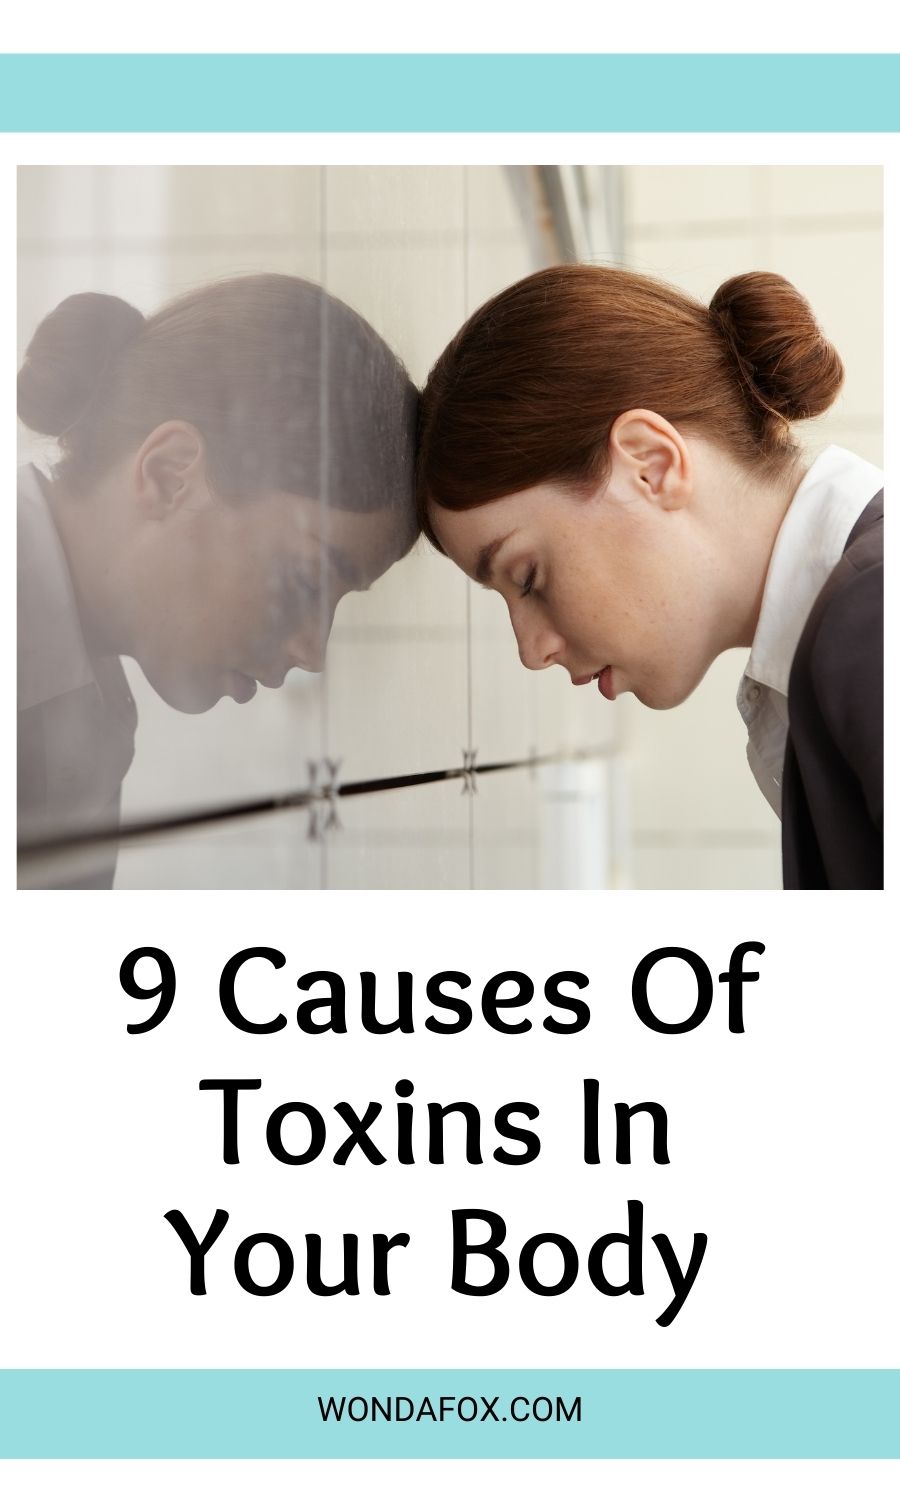 9 Causes Of Toxins In Your Body